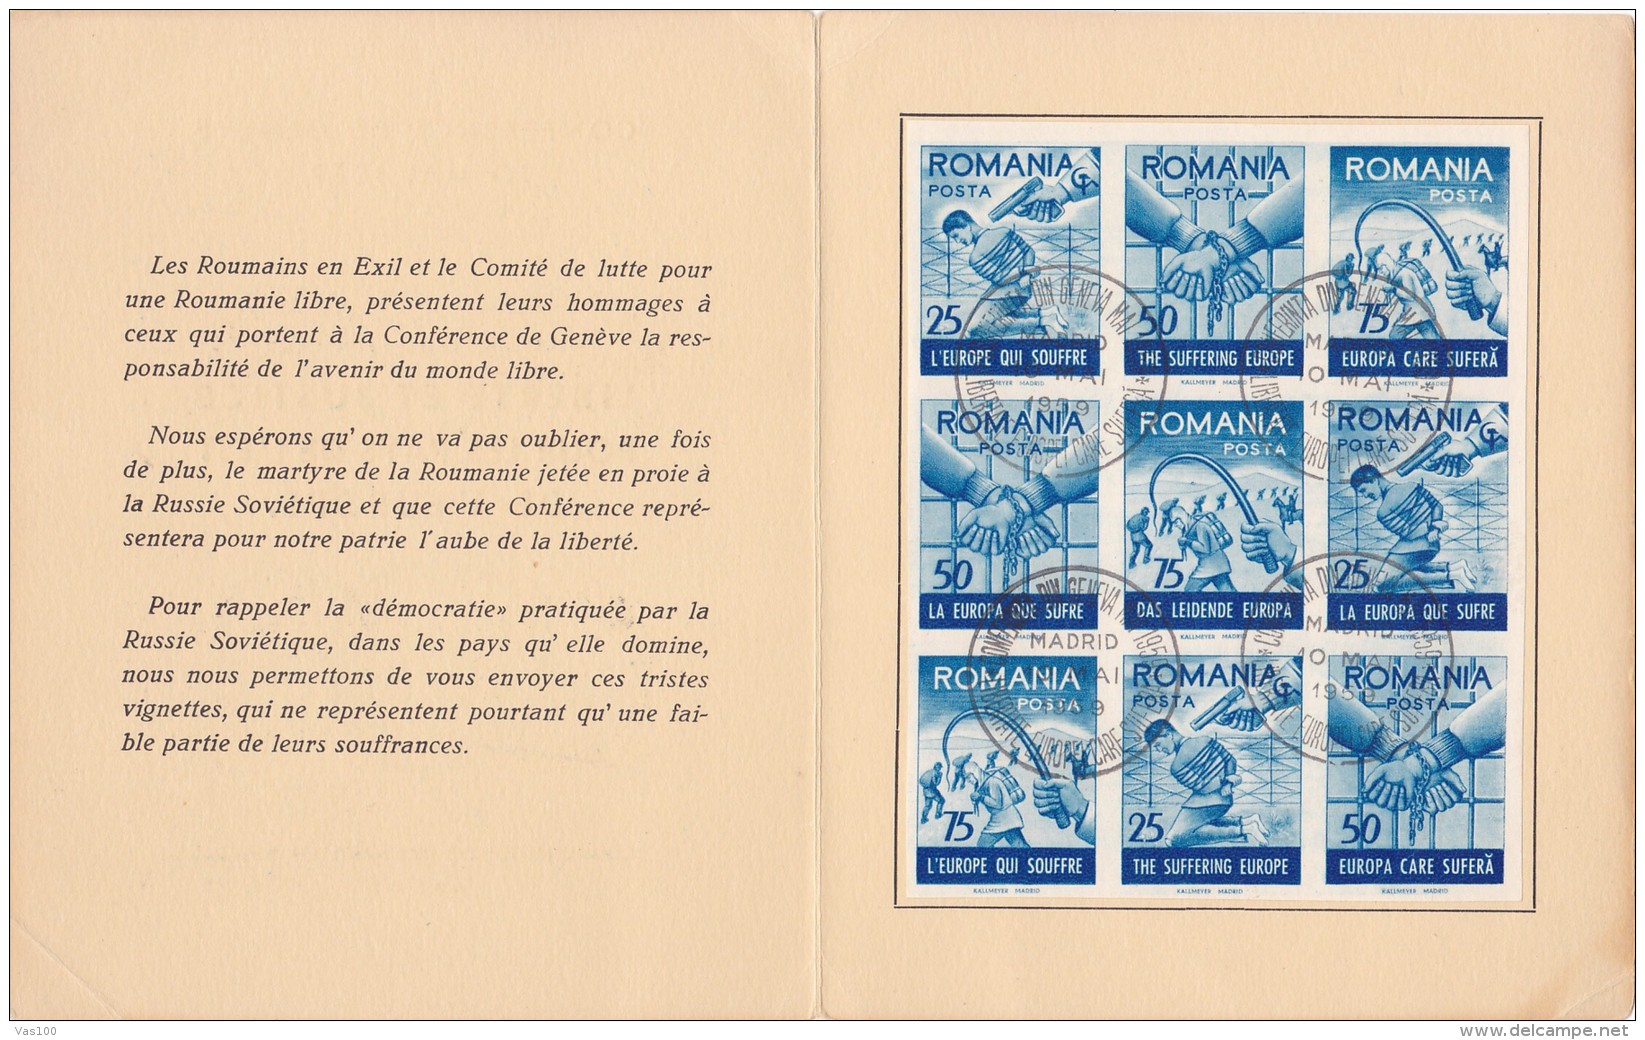 #T97    CONFERENCE , GENEVA, FREEDOM AND JUSTICE ,    BOOKLETS,   1959 , SPAIN EXIL, ROMANIA. - Cuadernillos